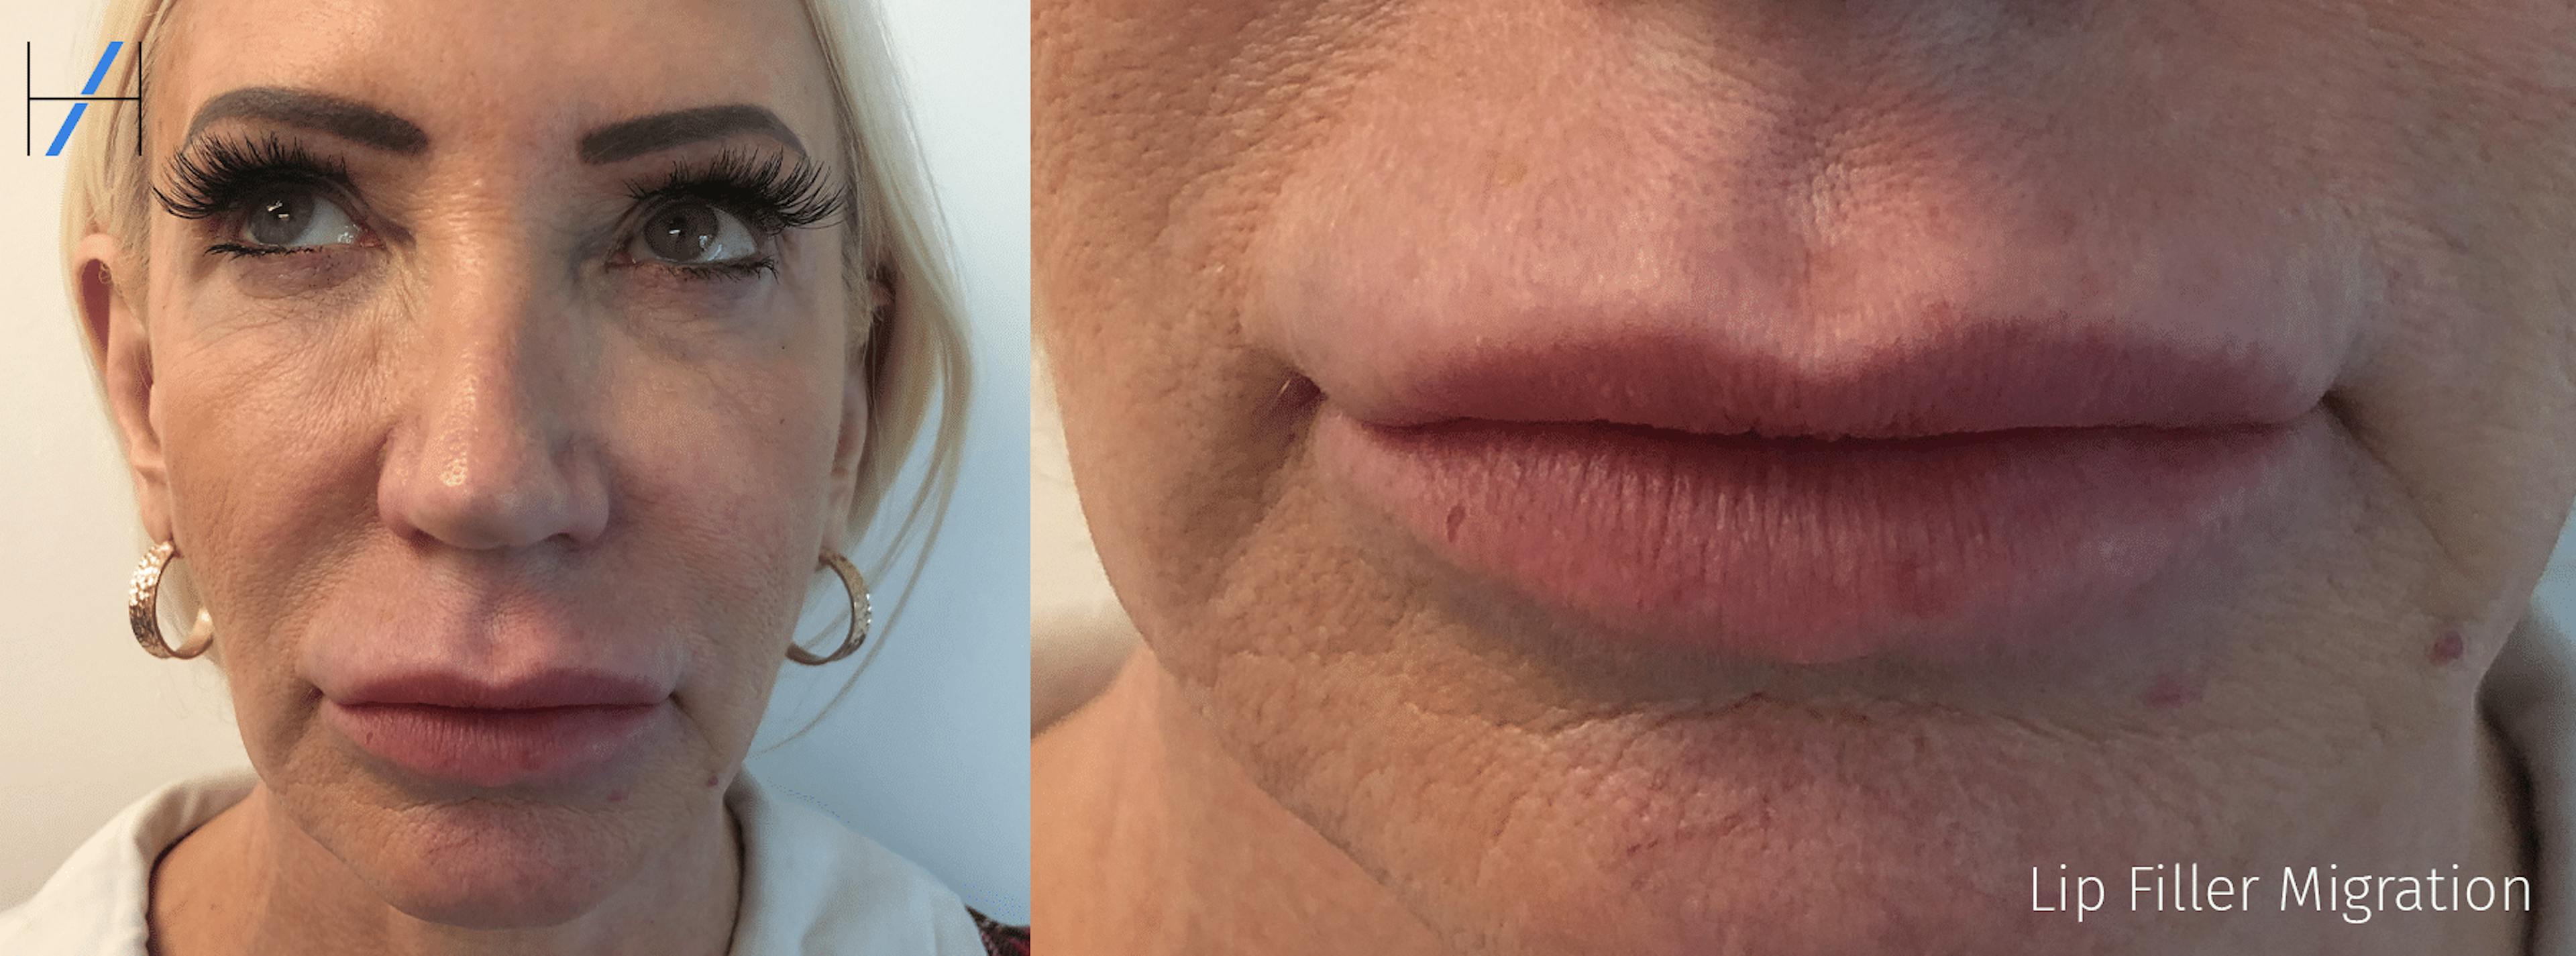 an example of lip filler migration complications